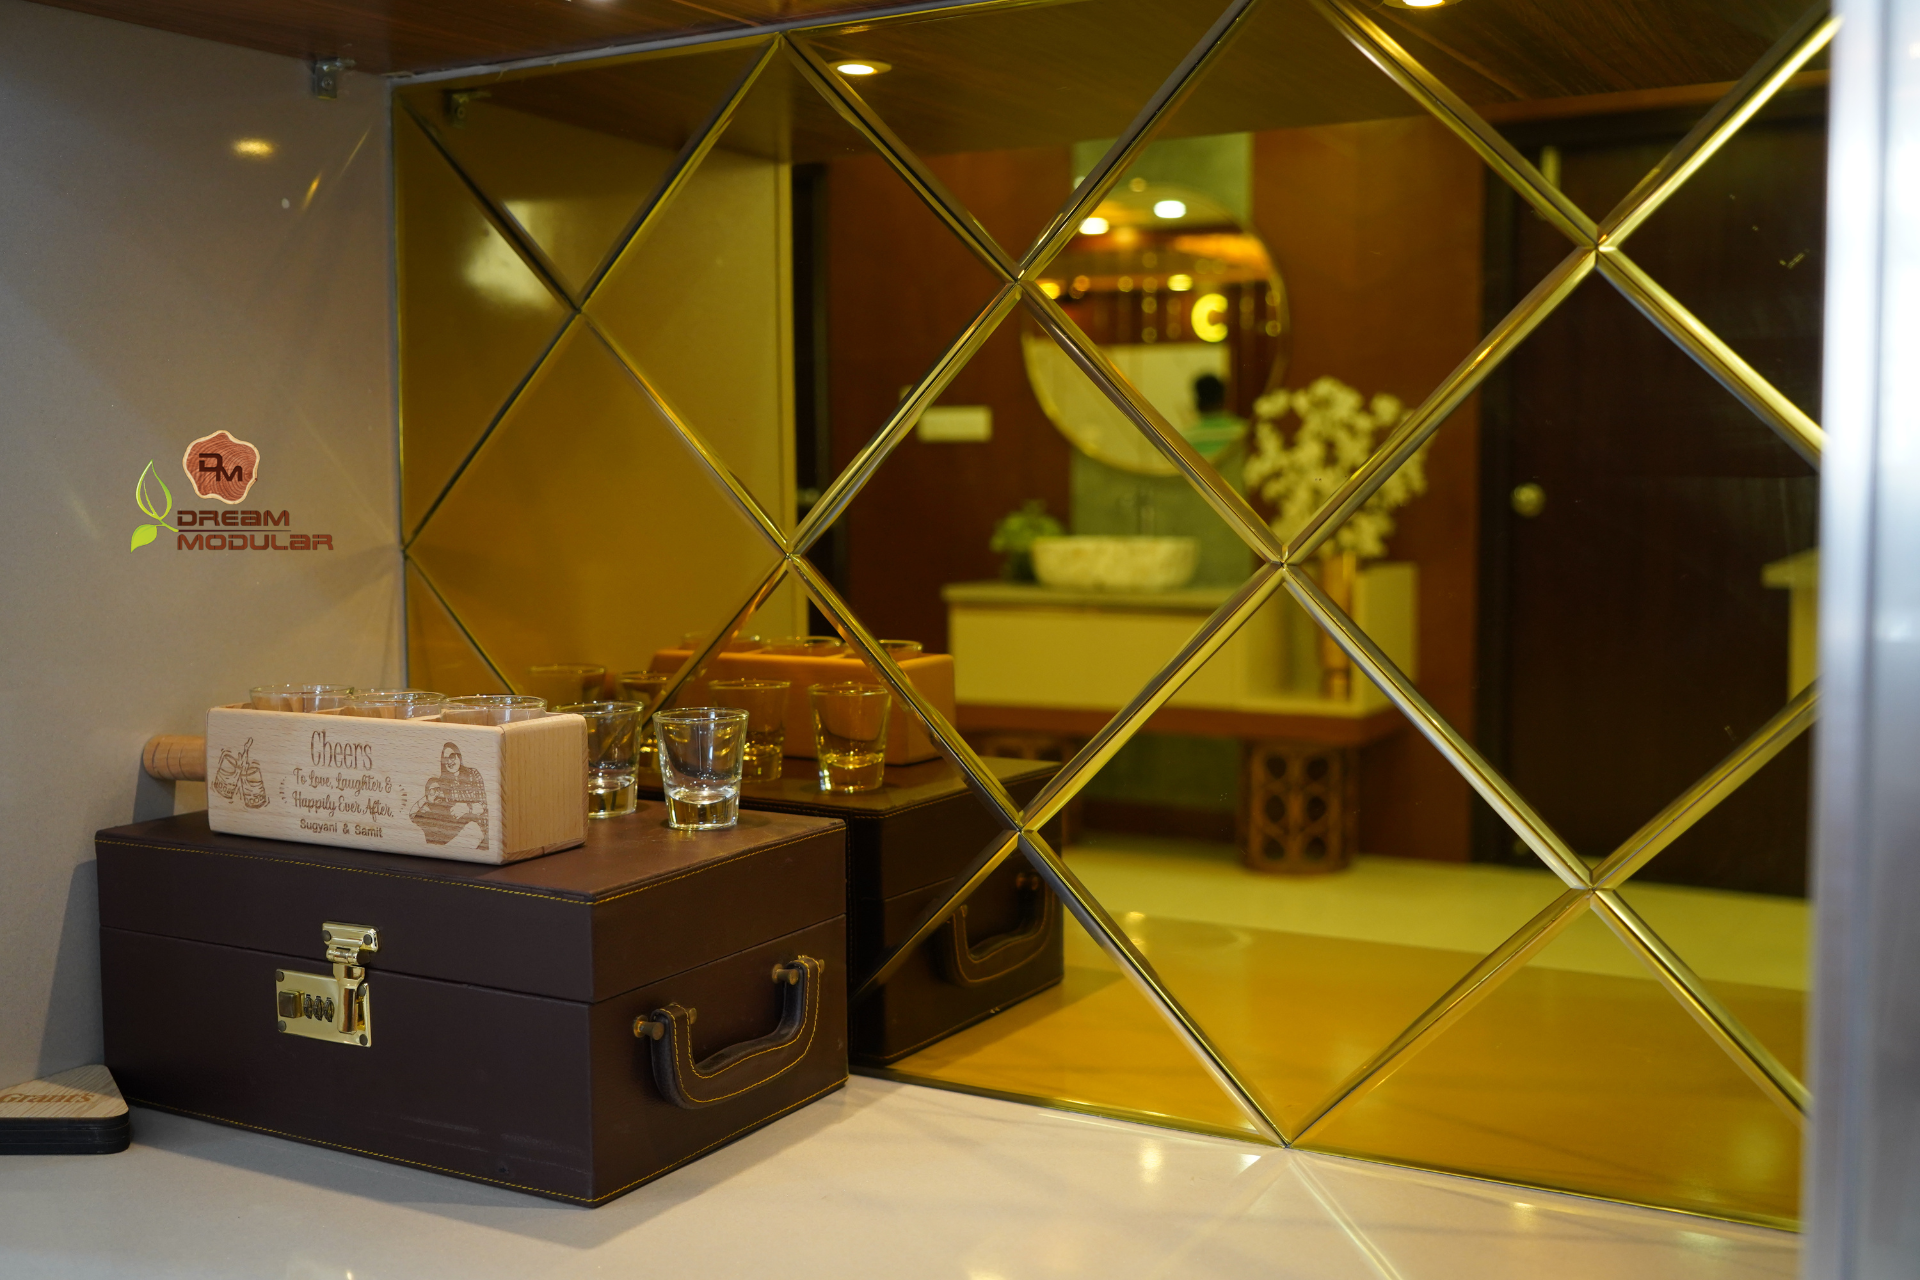 A crockery unit mirror with an aesthetically pleasing interior design in a room.